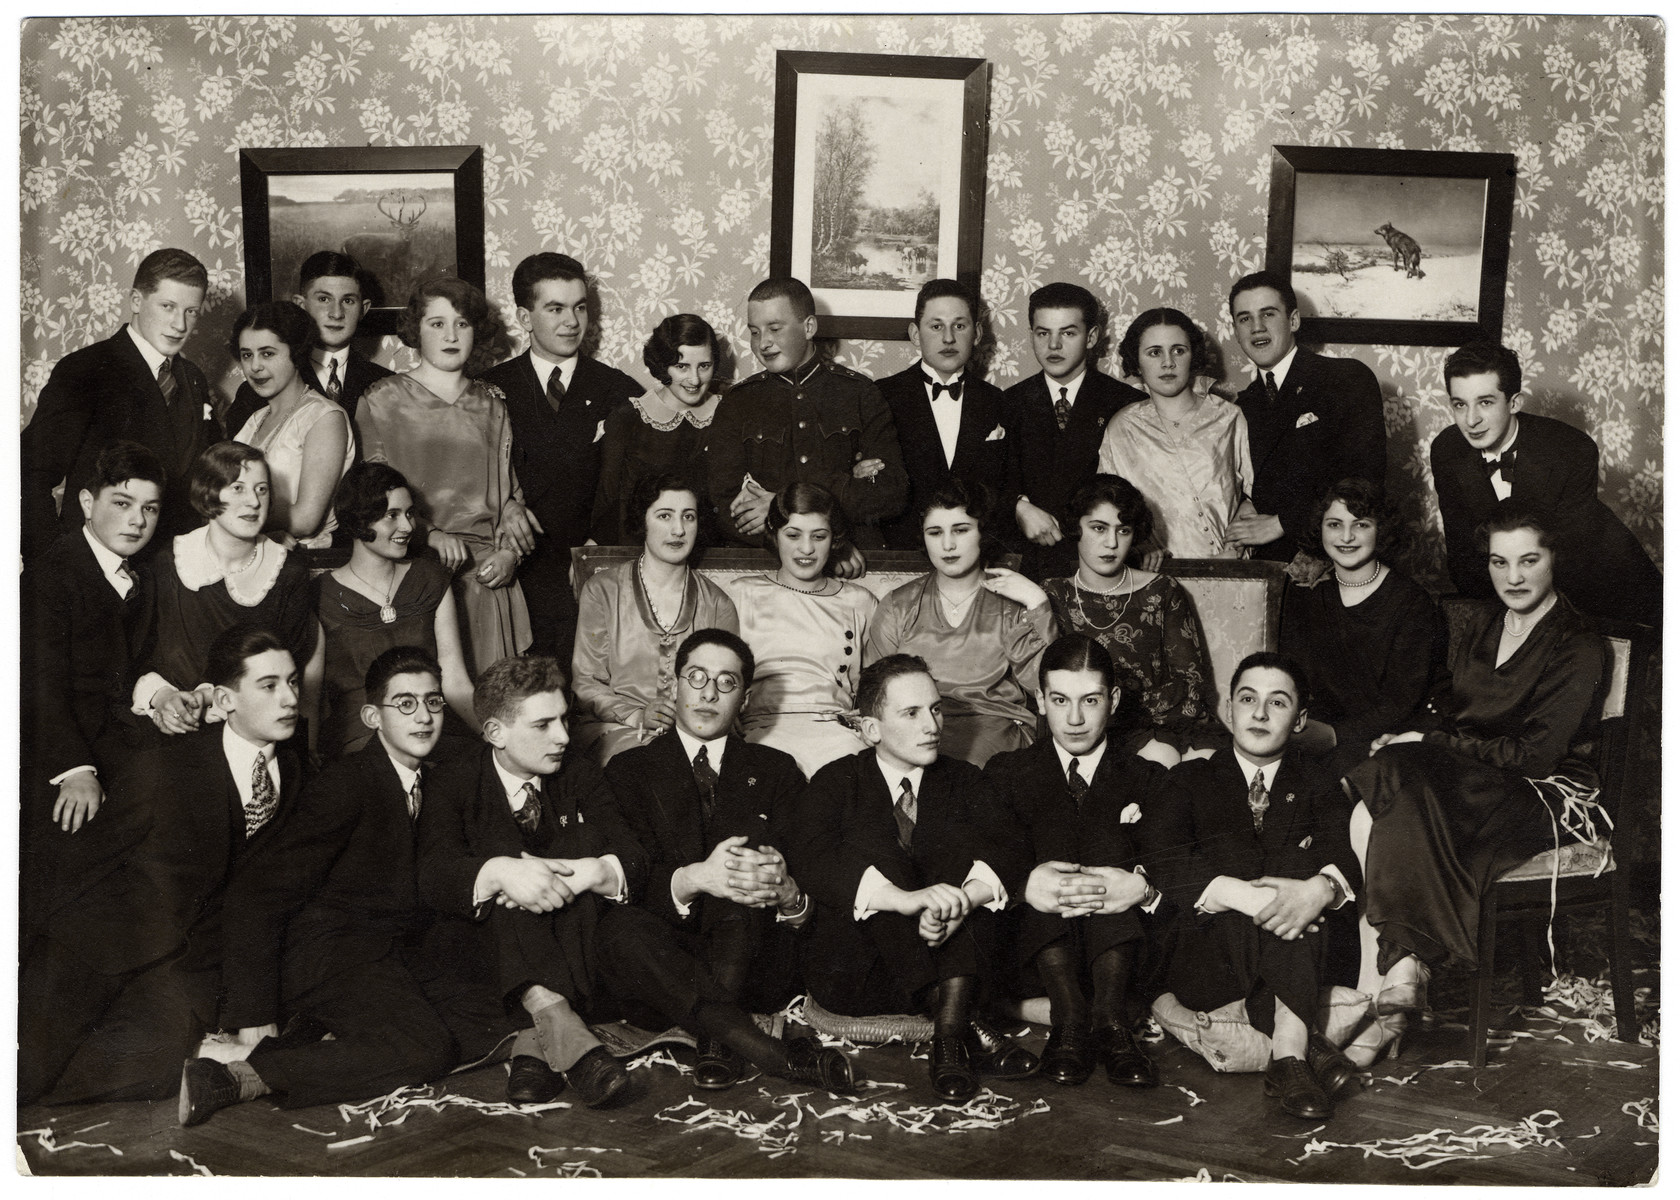 Prewar group portrait of young people celebrating the New Year in Riga, Lativa.